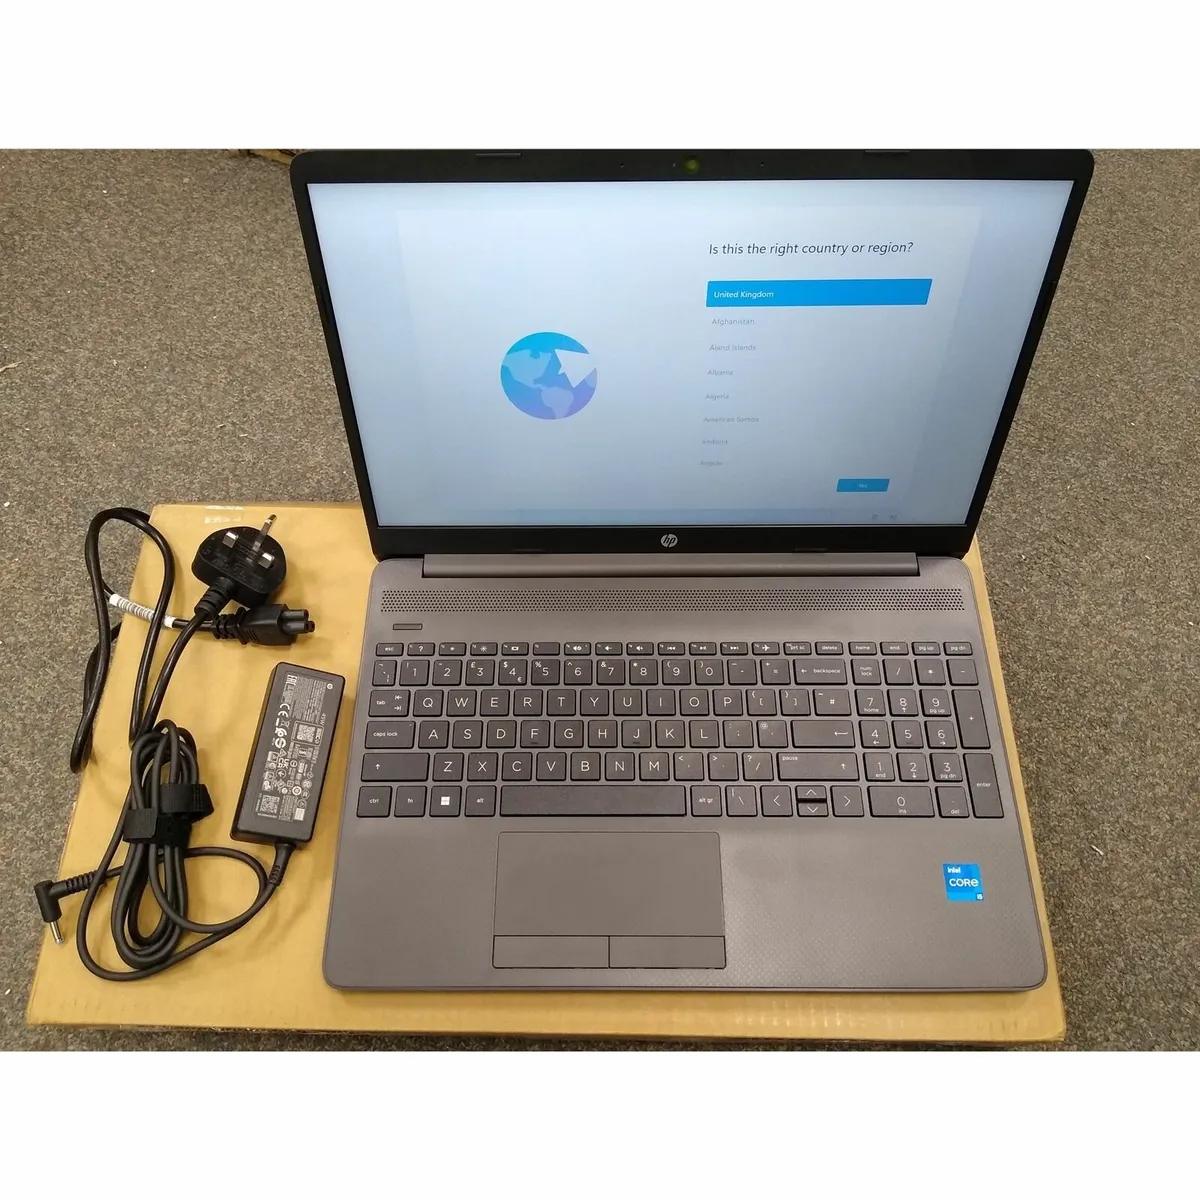 HP 250 G9 Laptop. Comes with free gift. - Image 1